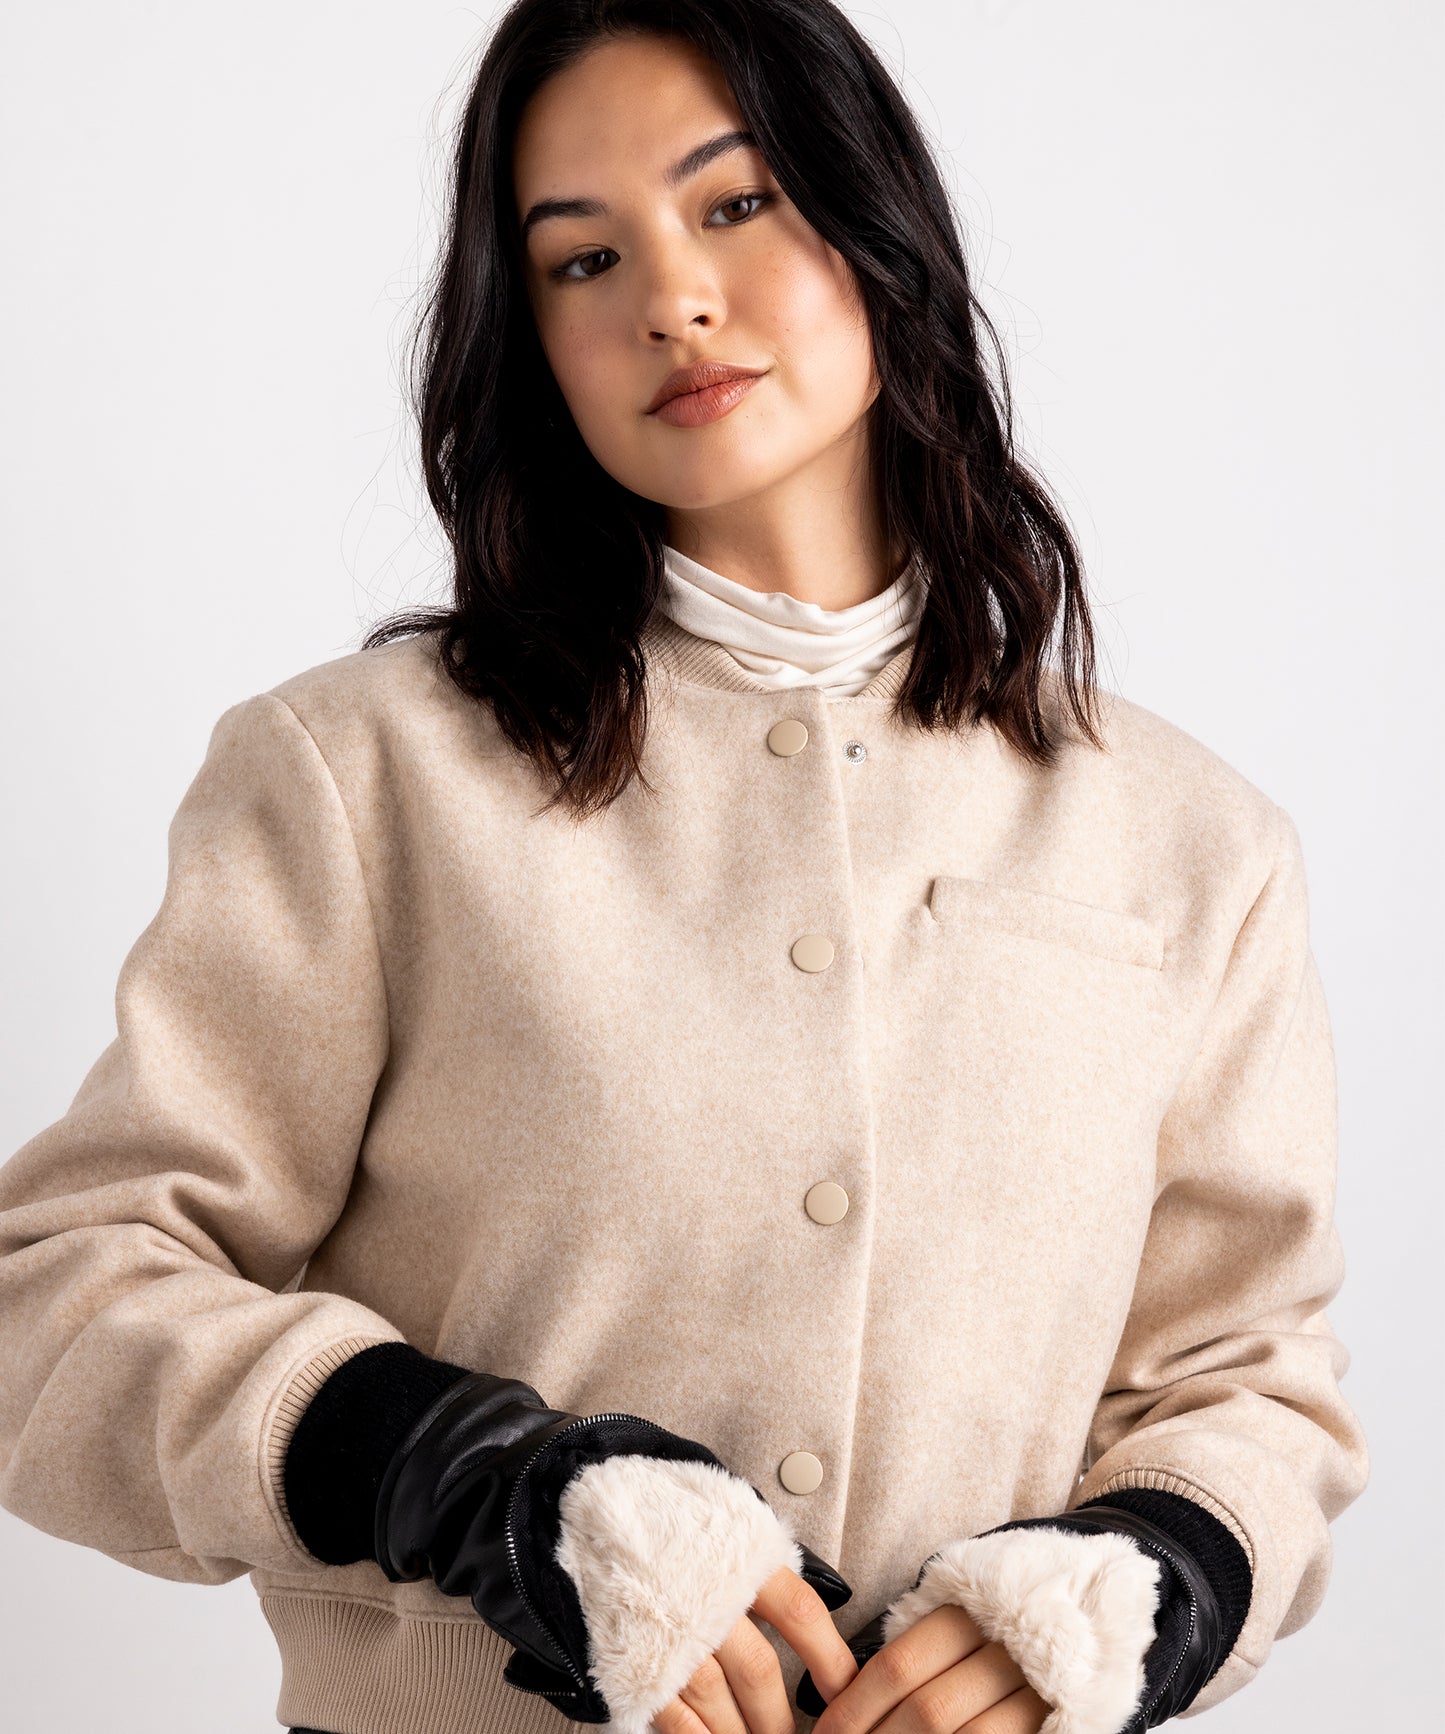 Zip-top Glove With Faux Fur Lining in color Black/Cream on a model